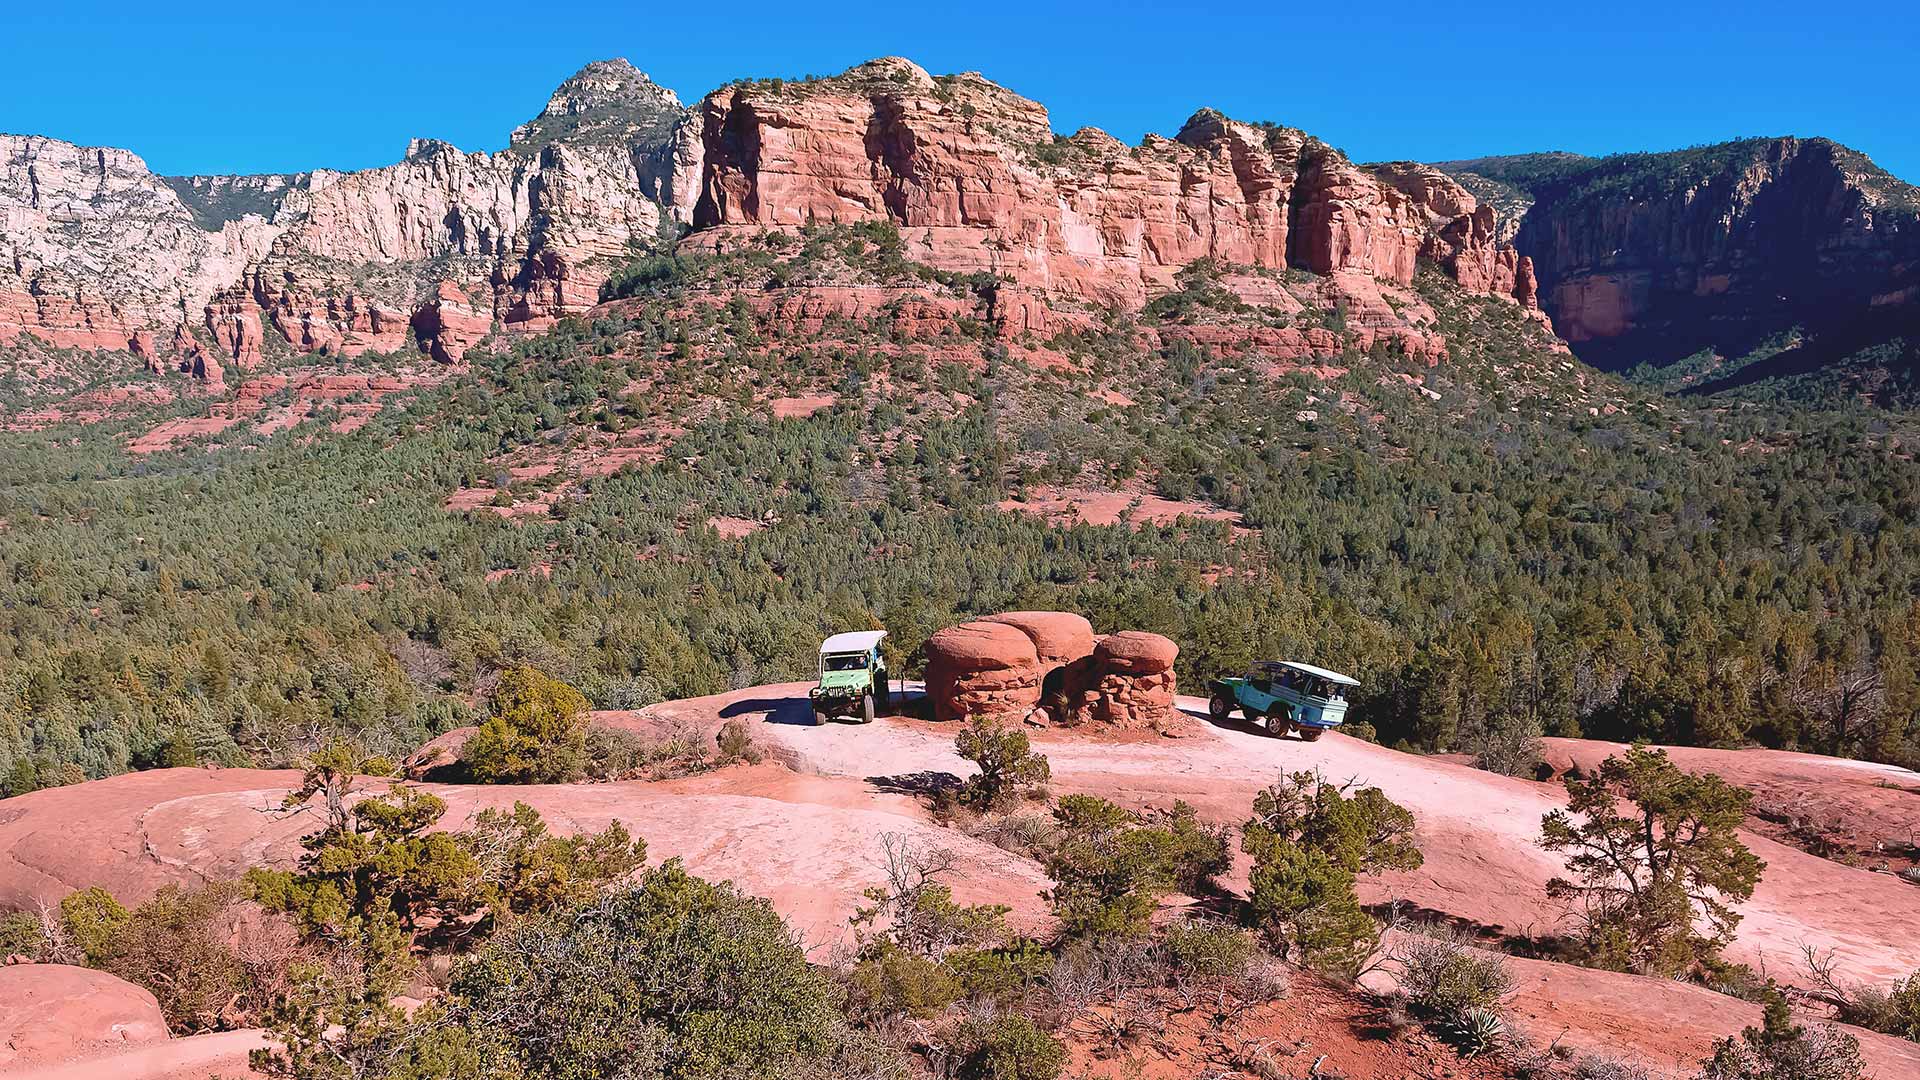 Chicken point in Sedona with two parked Jeeps